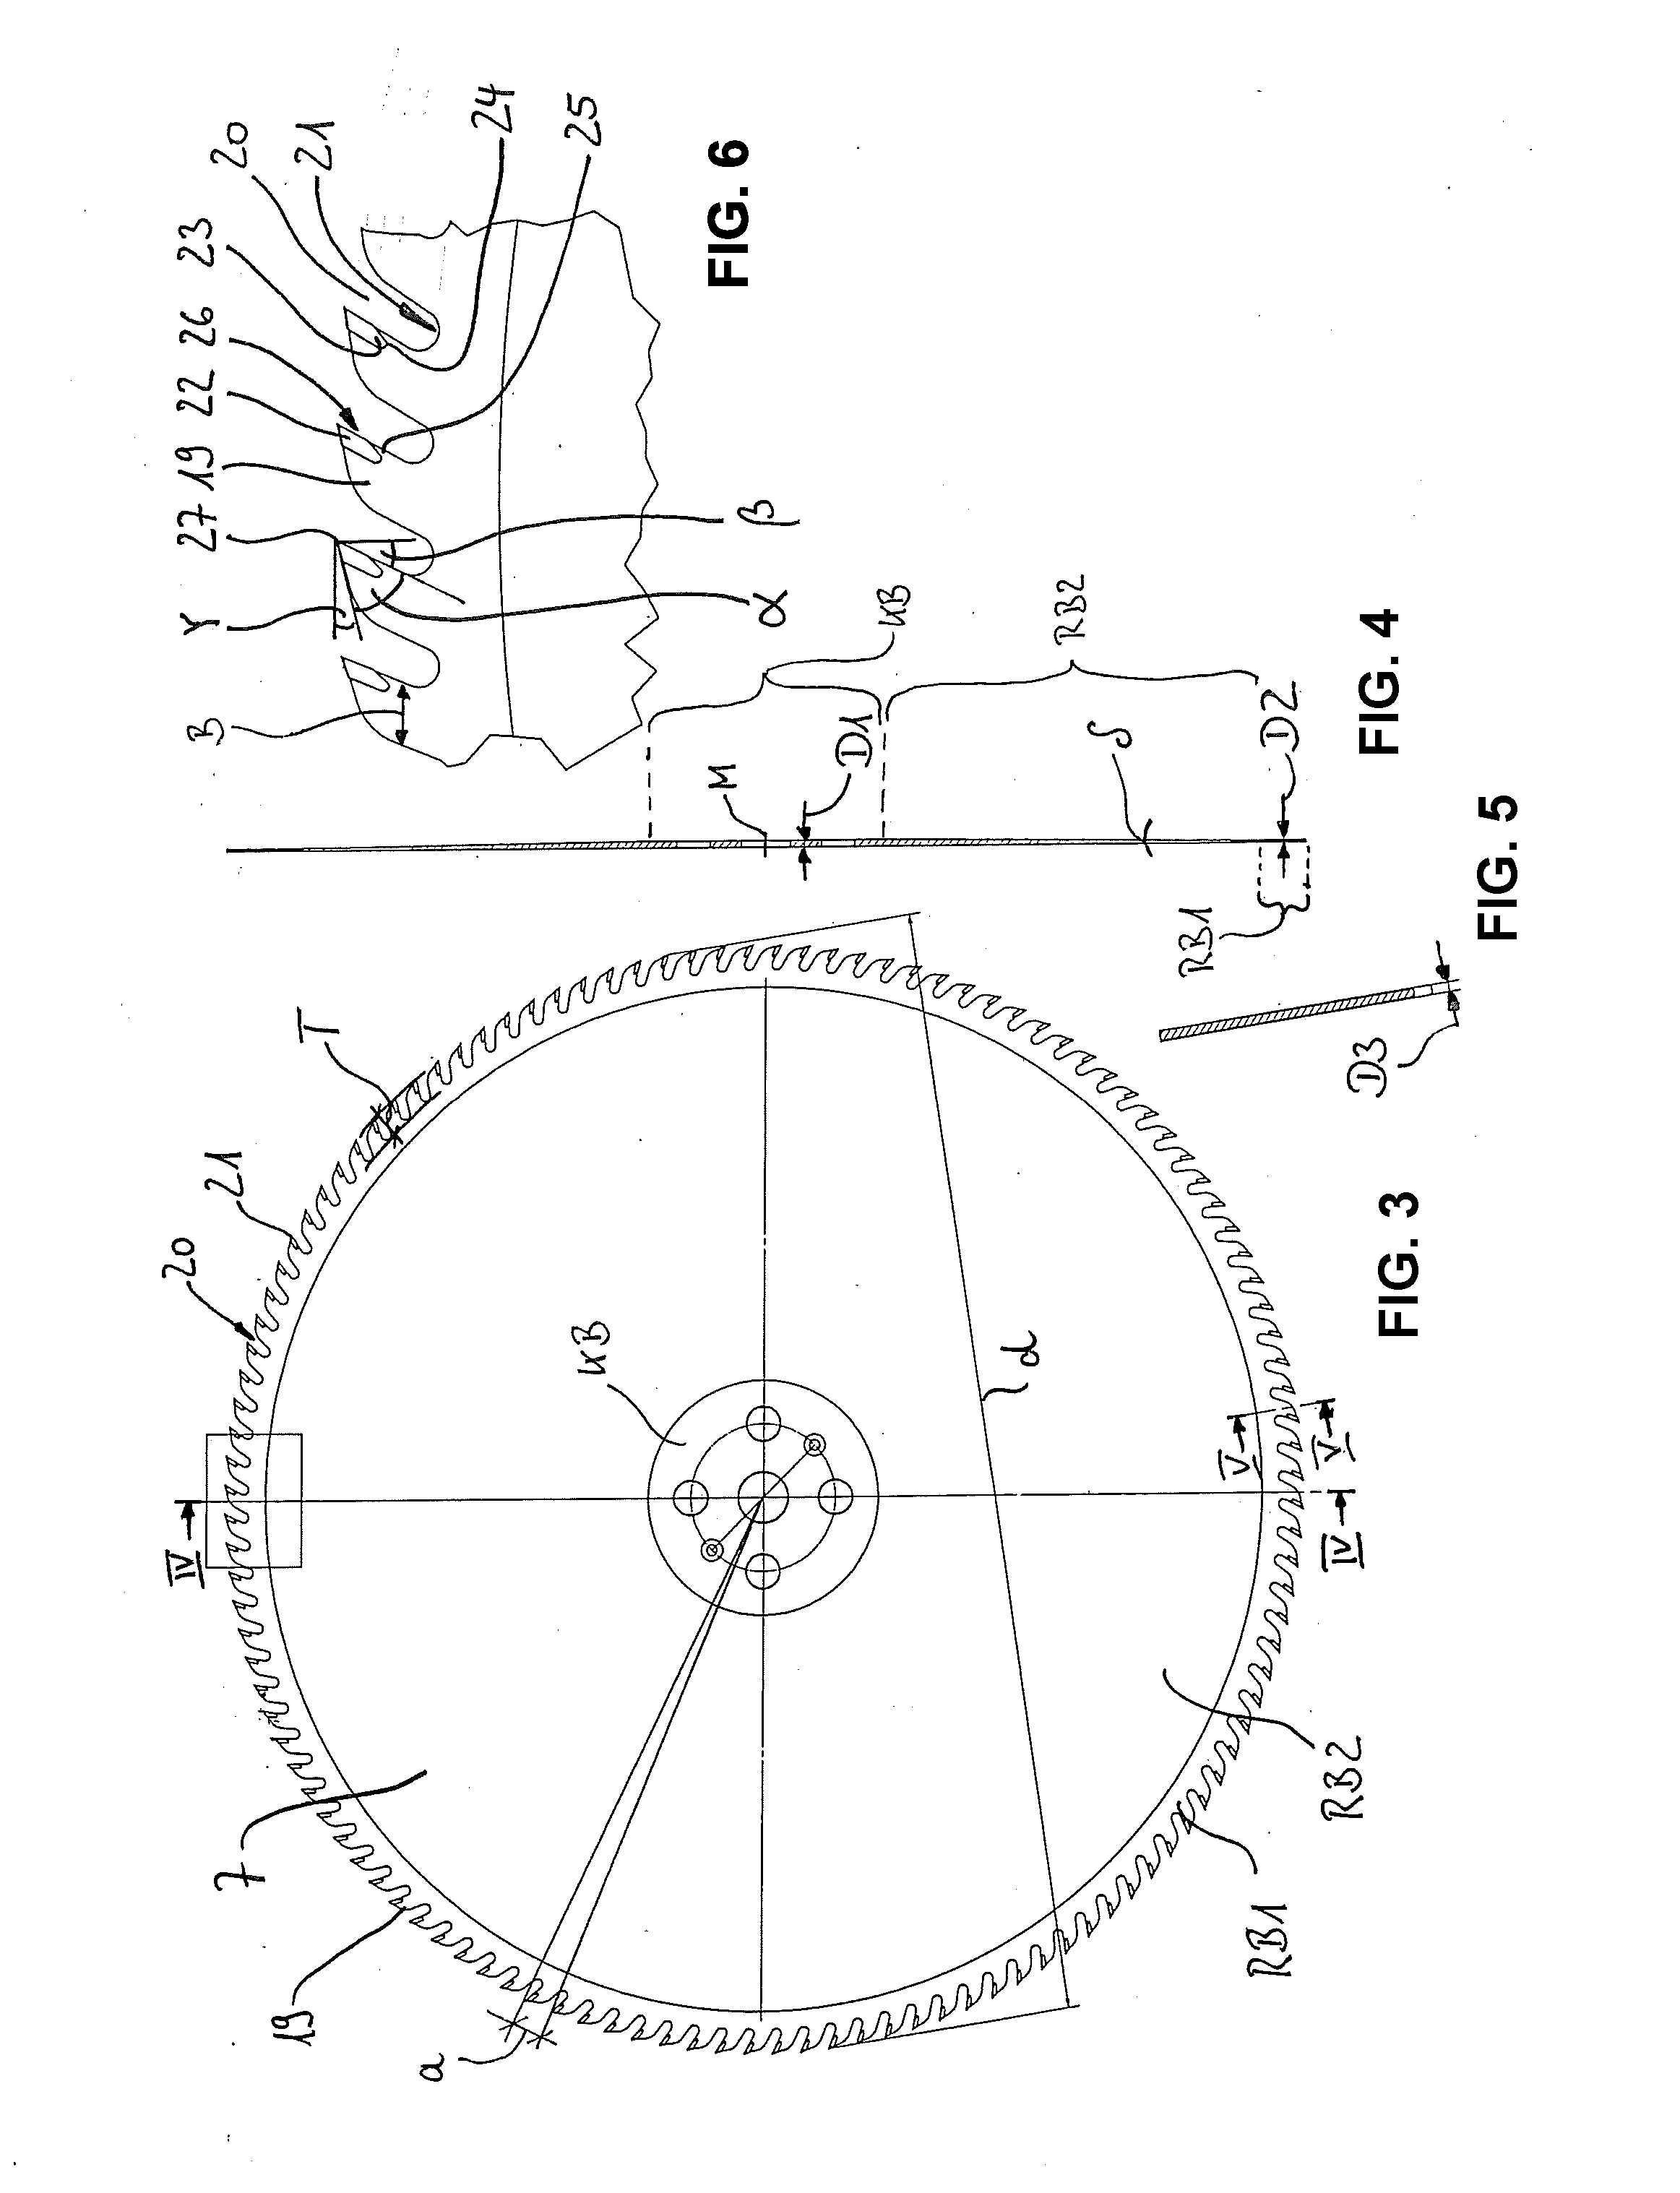 Device and method for cutting a frozen food strand into slices